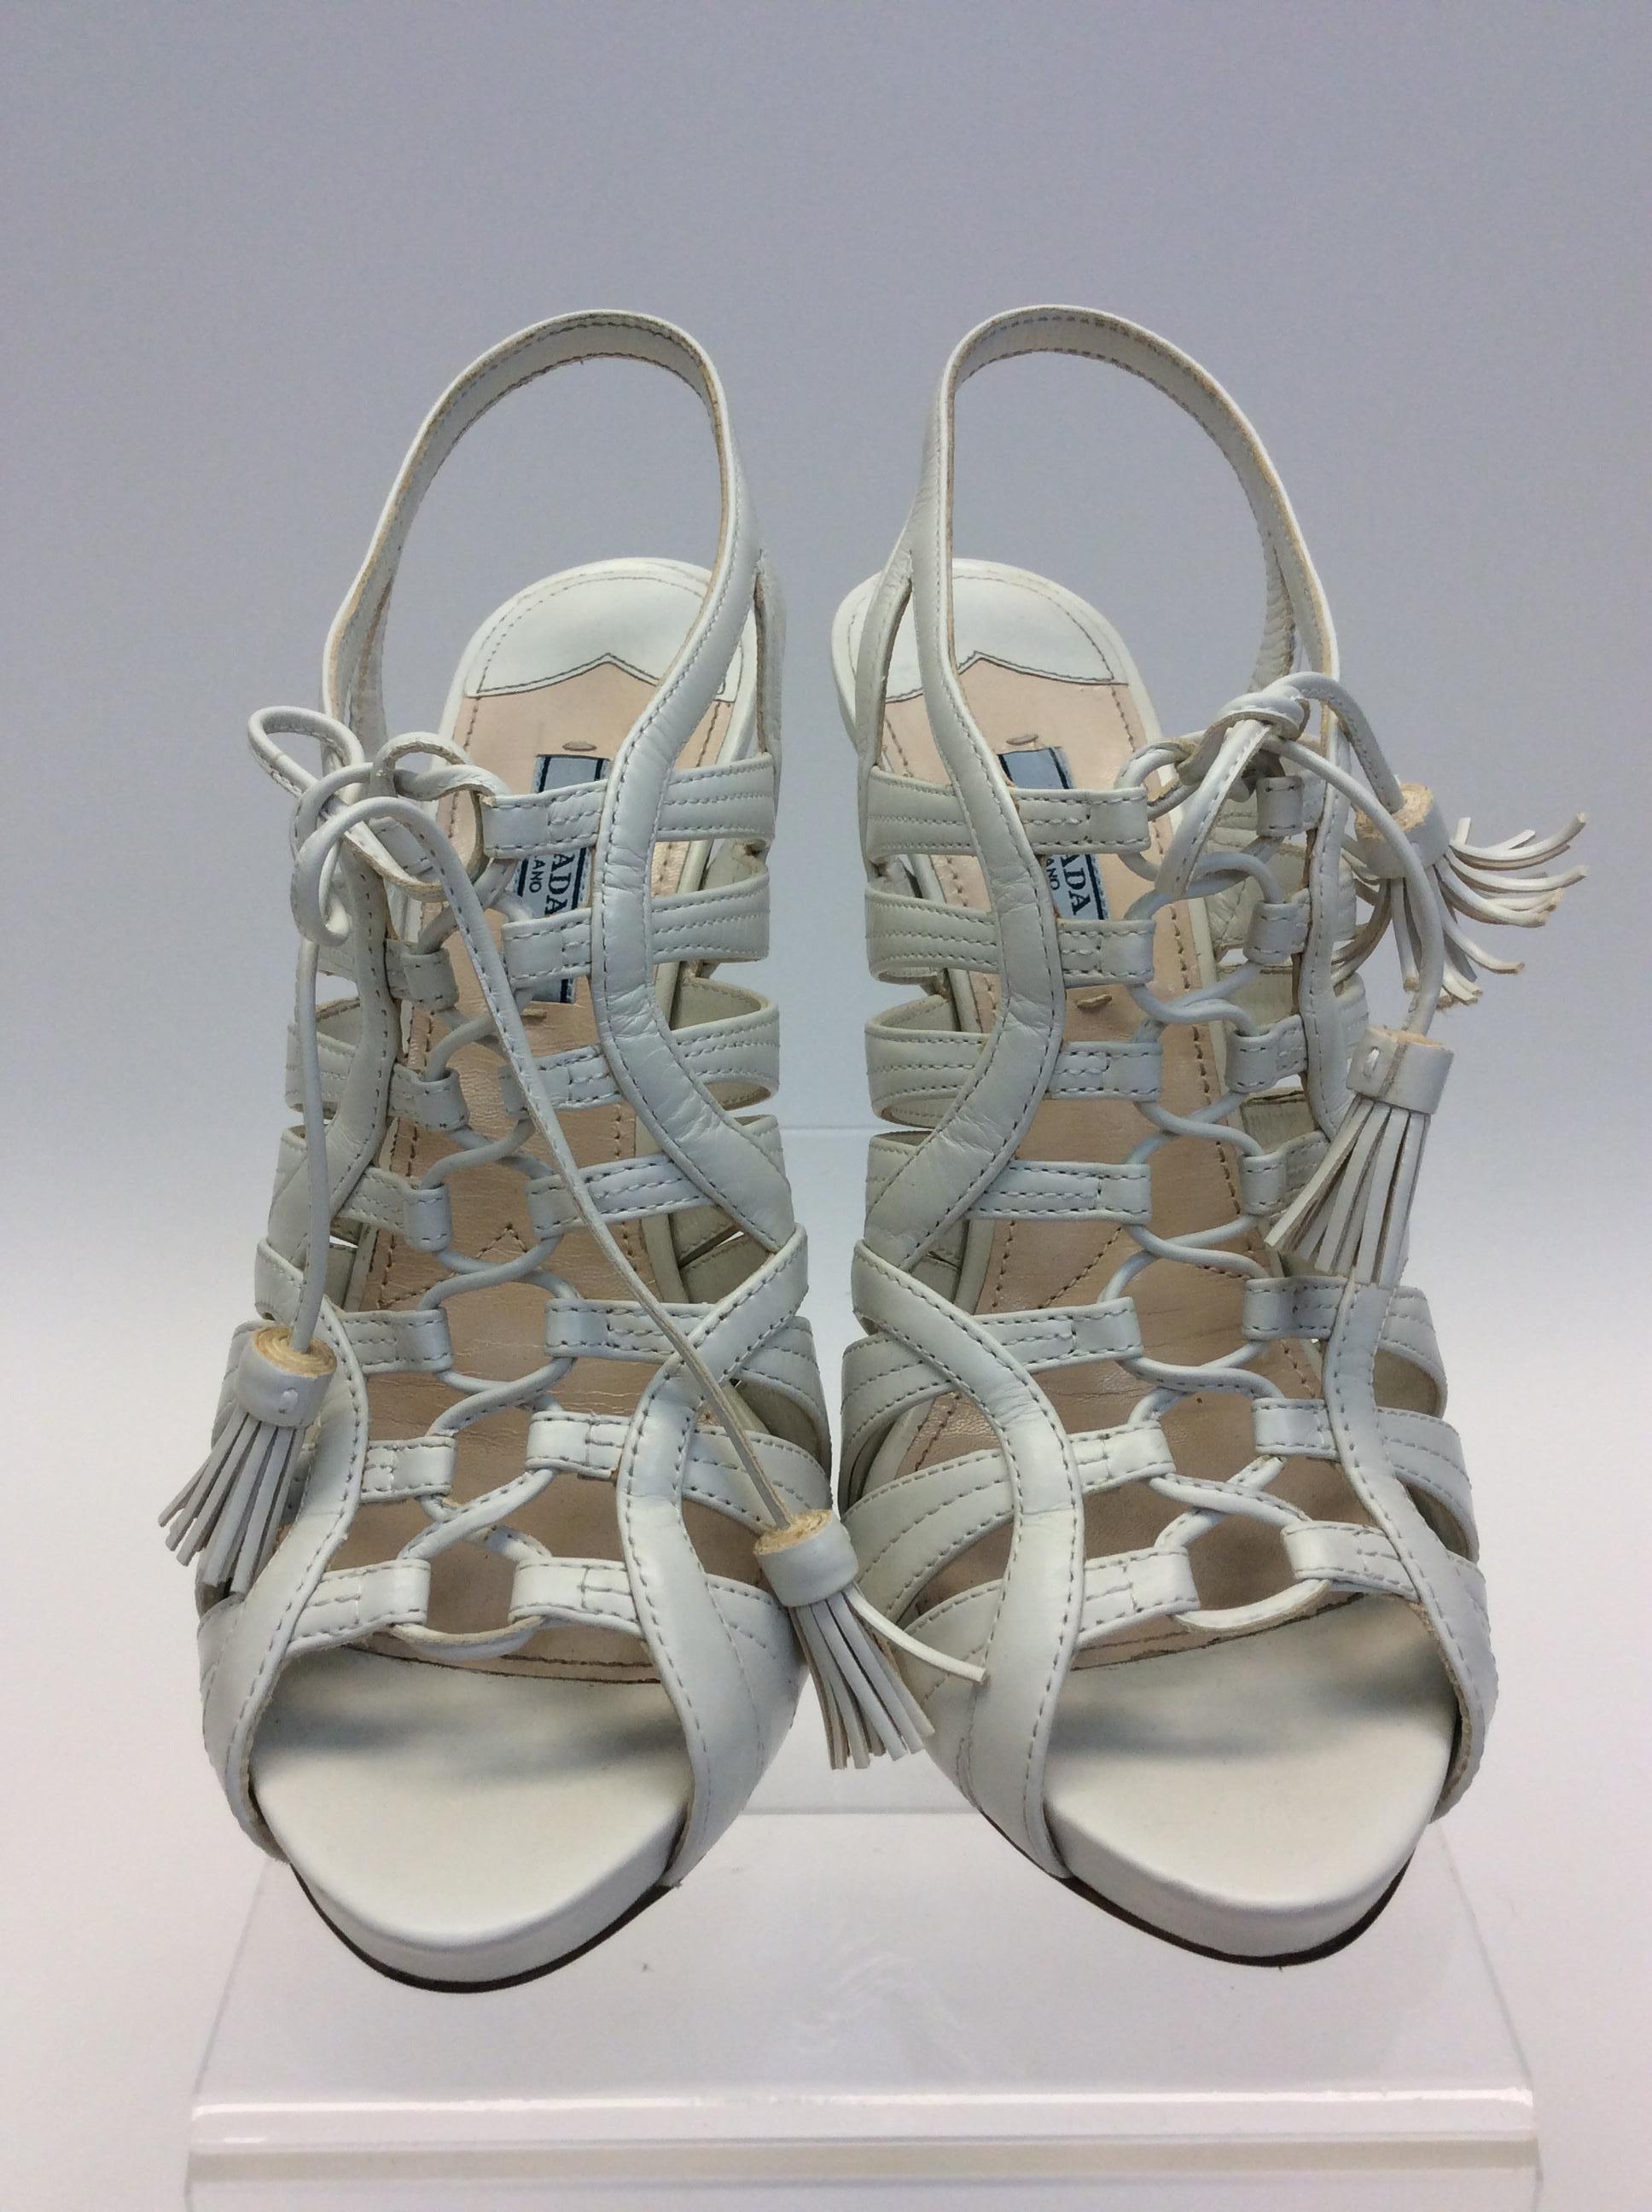 Prada White Leather Heeled Sandal
$299
Made in Italy
Size 39
.5